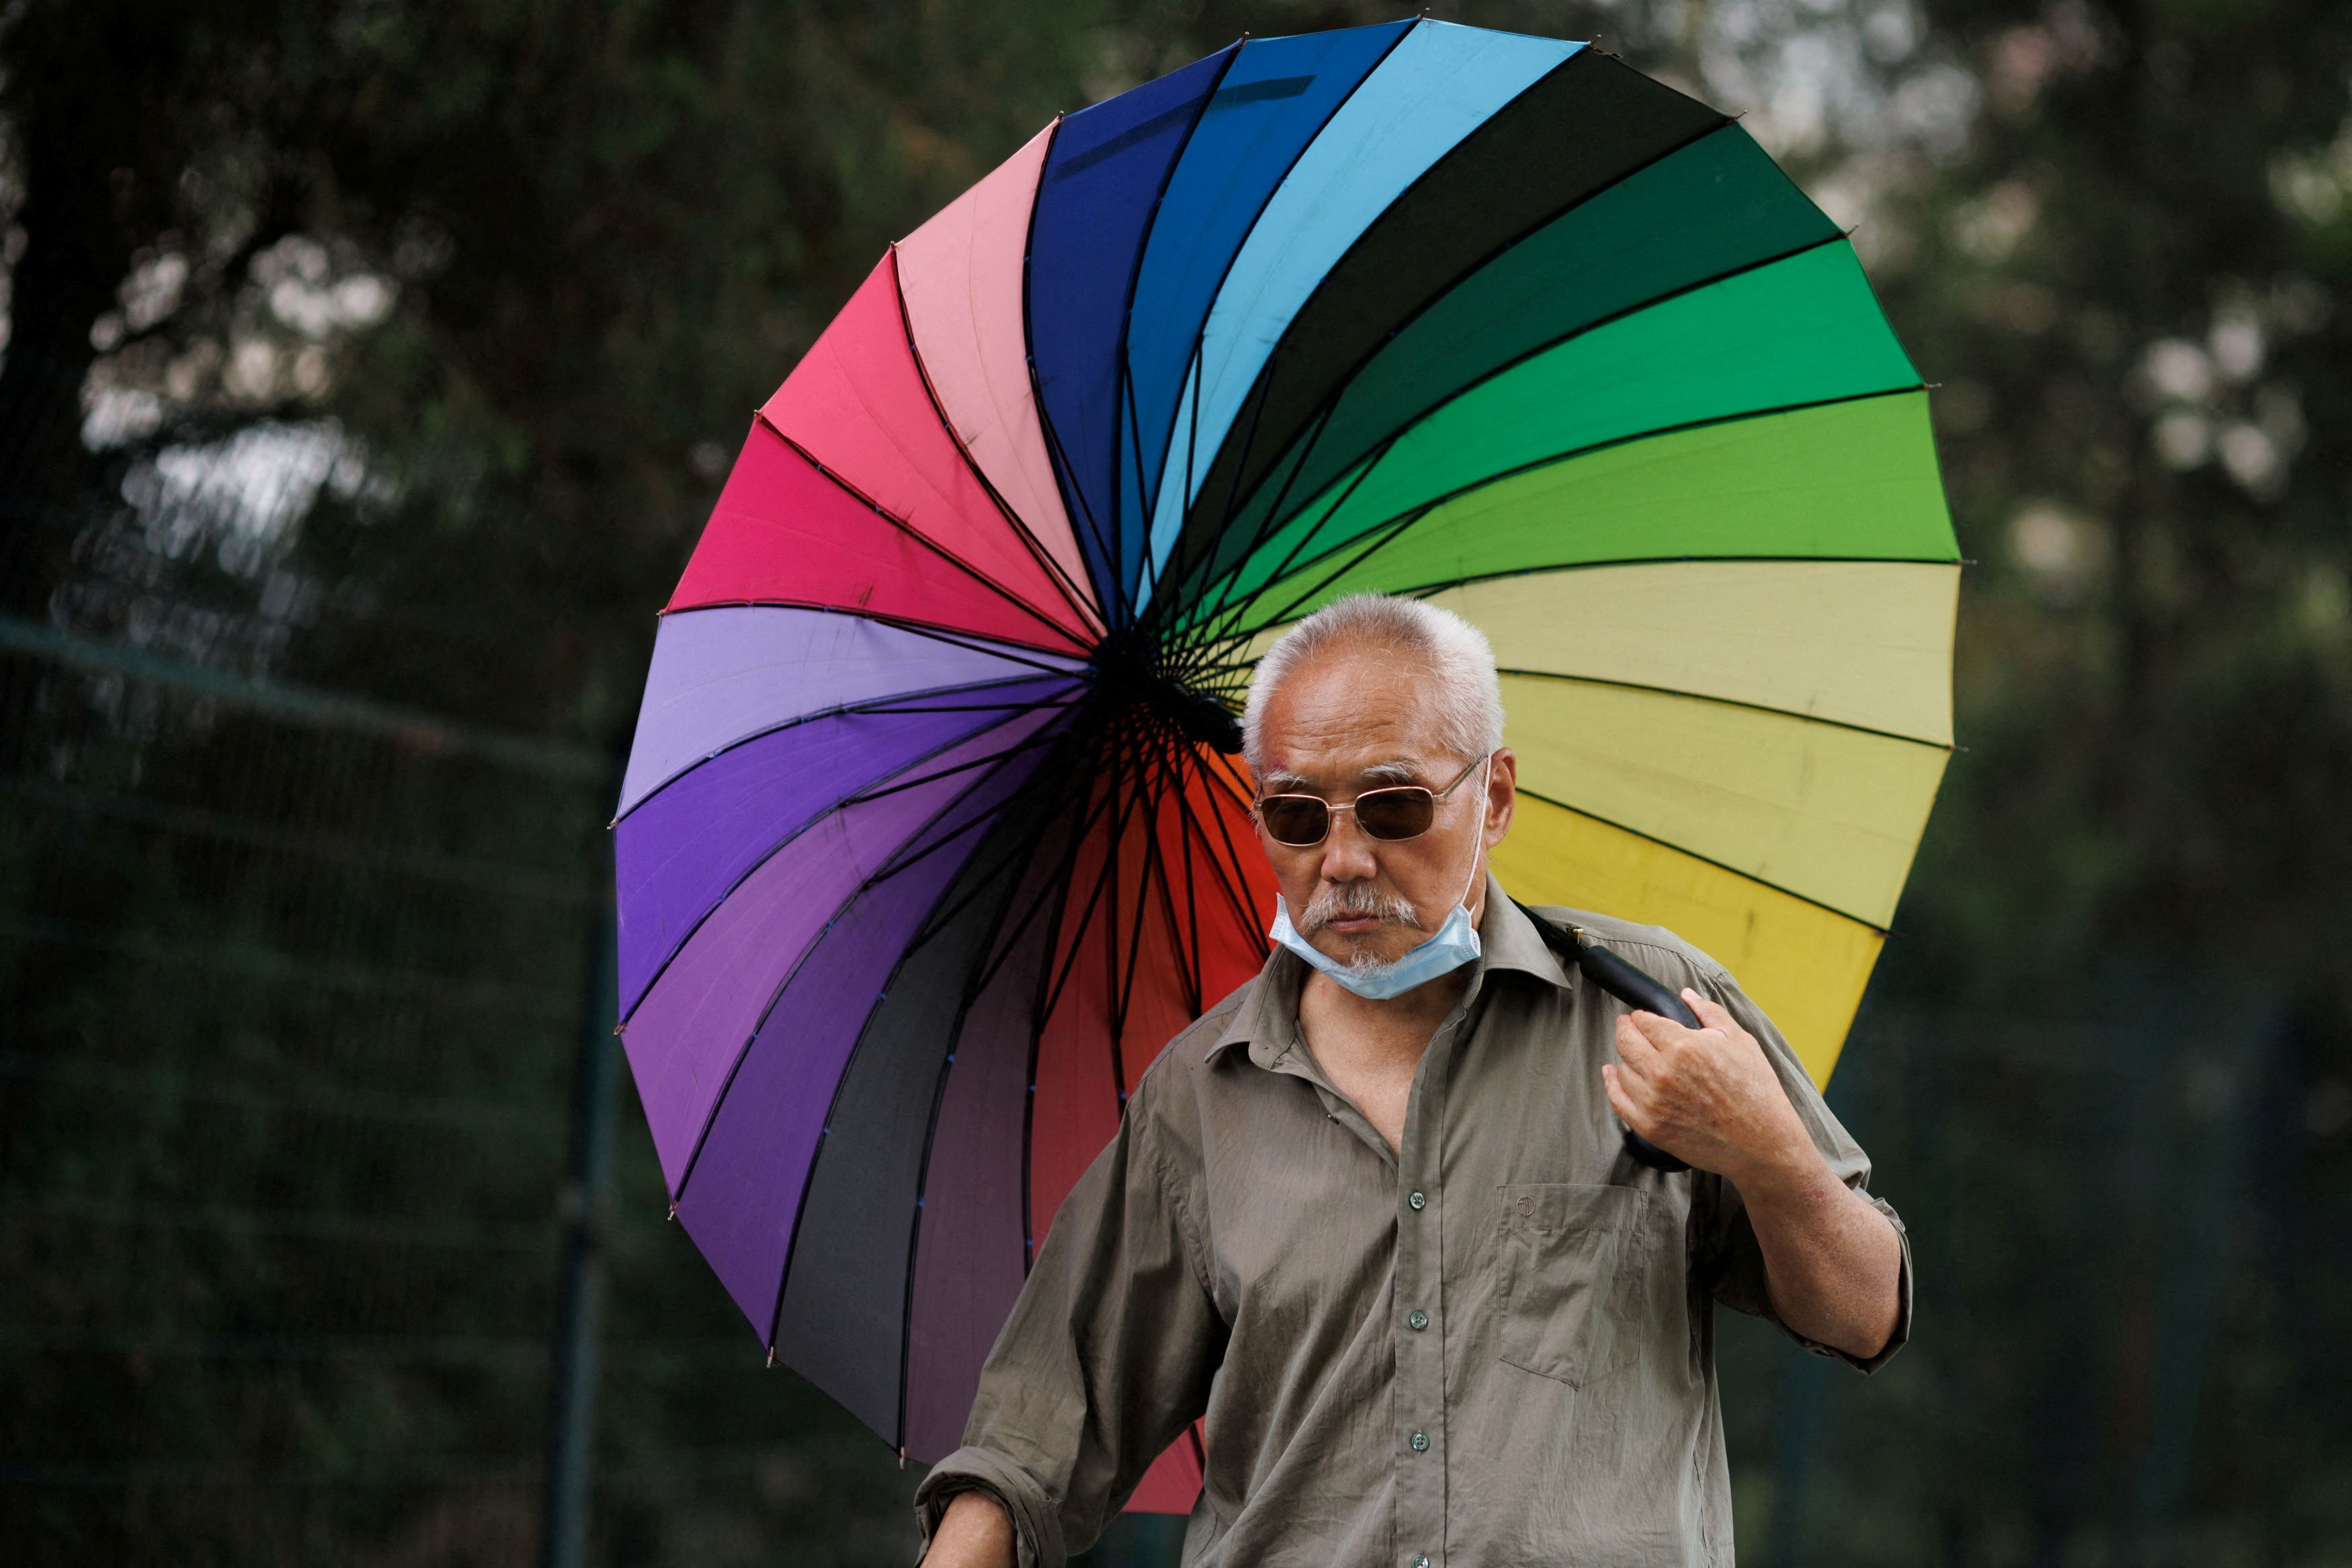 A man carries a parasol on a hot day on Summer Solstice in Beijing